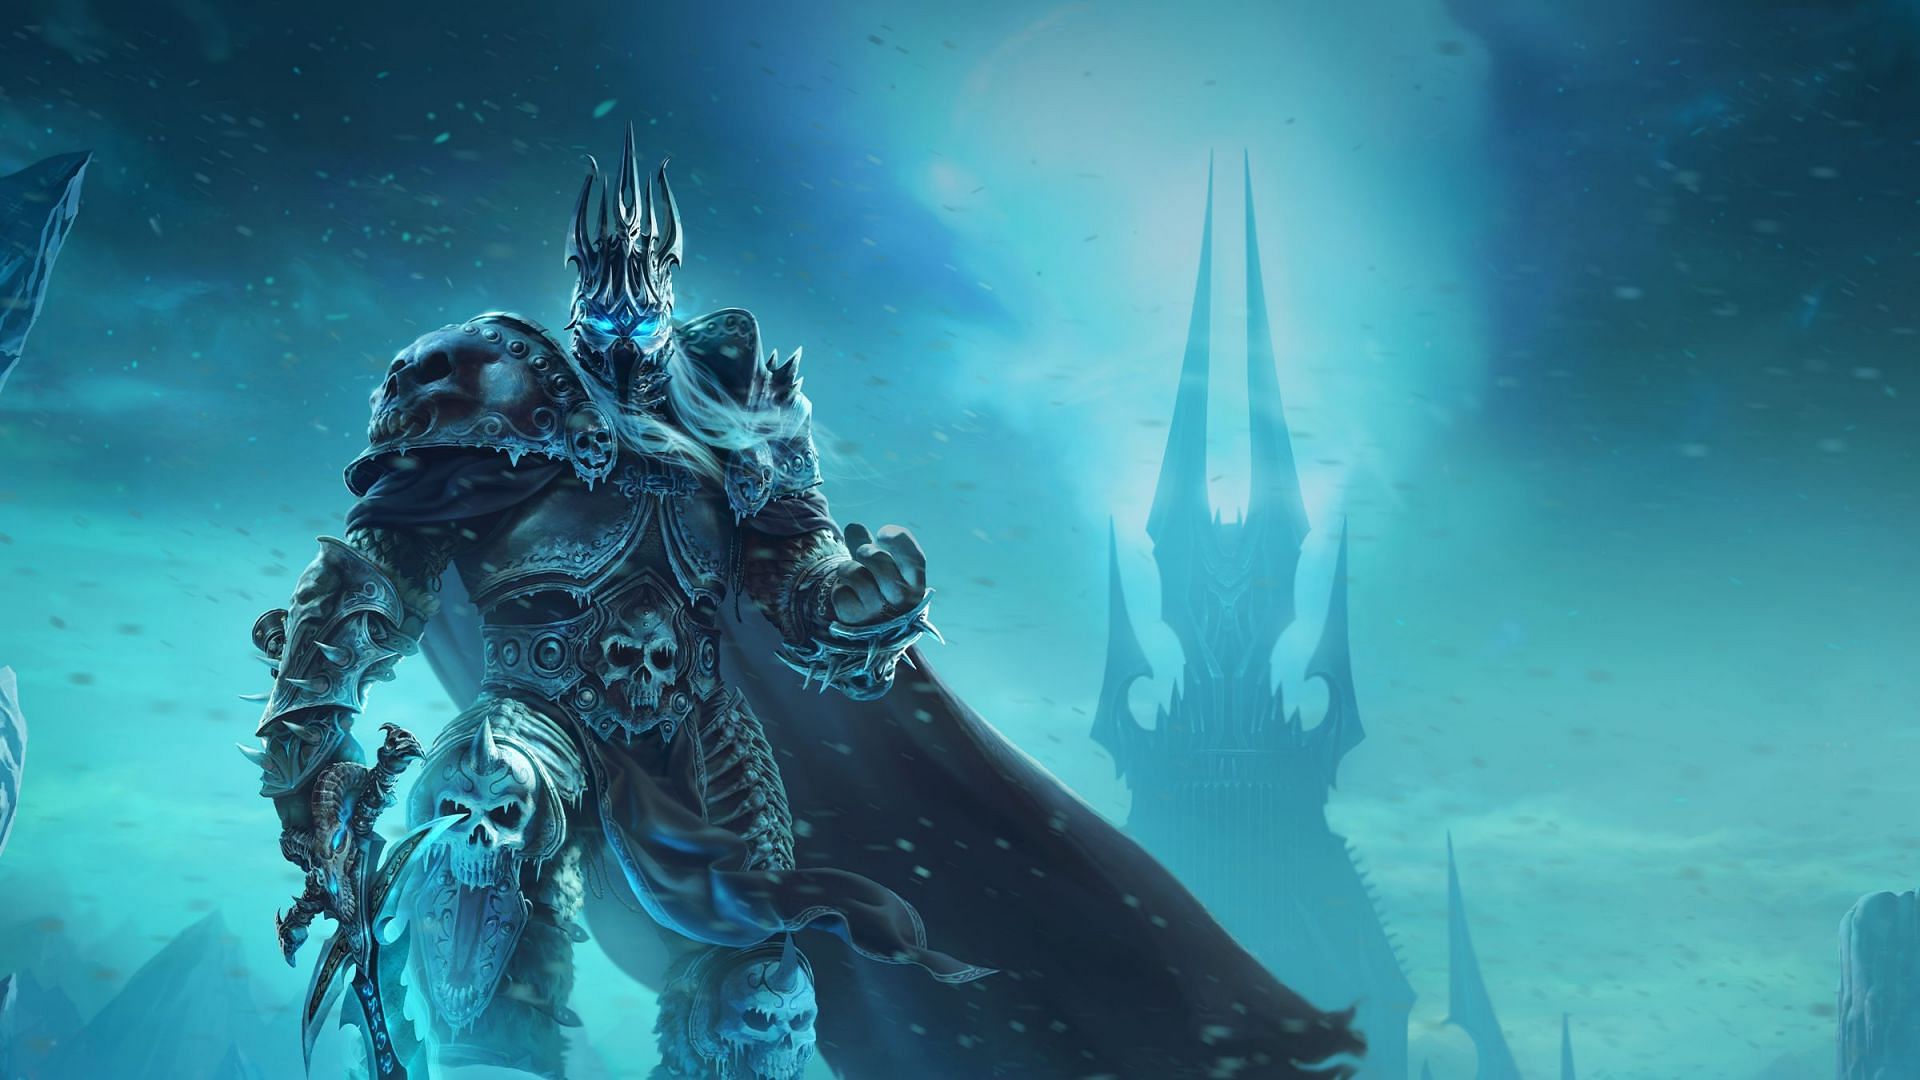 The Lich King awaits in Icecrown Citadel, but what do WoW Classic players need to know about leveling quickly? (Image via Activision Blizzard)